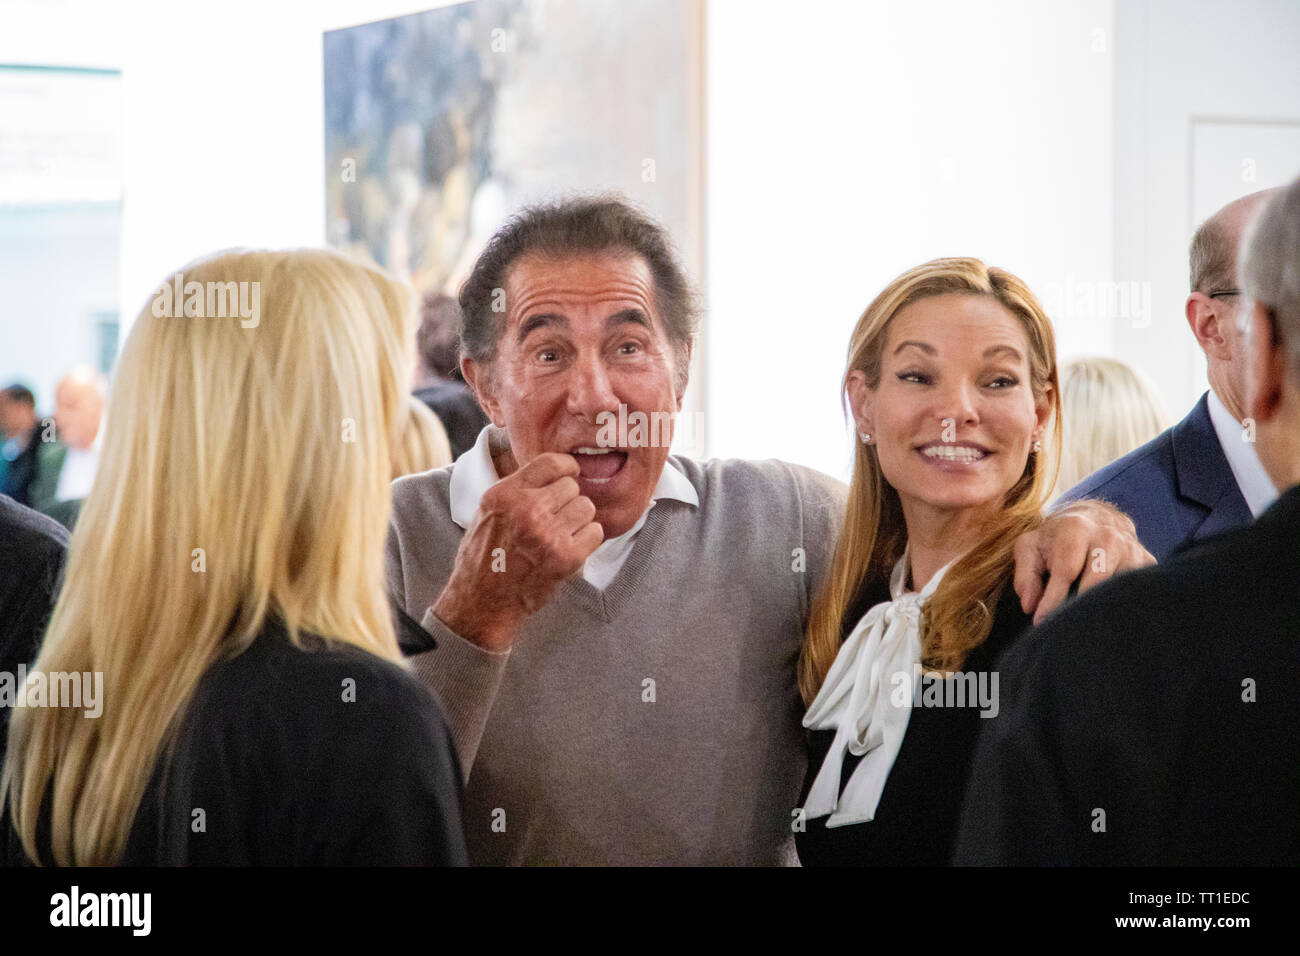 Real Estate investor, Casino mogul, art collector and donor to the Republican Party, Steve Wynn with his wife Andrea Hissom at the 49th annual Art Basel art fair in Basel. Steve Wynn also figured in 'Open Secret', one of the controversial art installations this year, where Andrea Bowers published names, pictures and stories of men caught up in the #metoo and Time's Up movement. Stock Photo